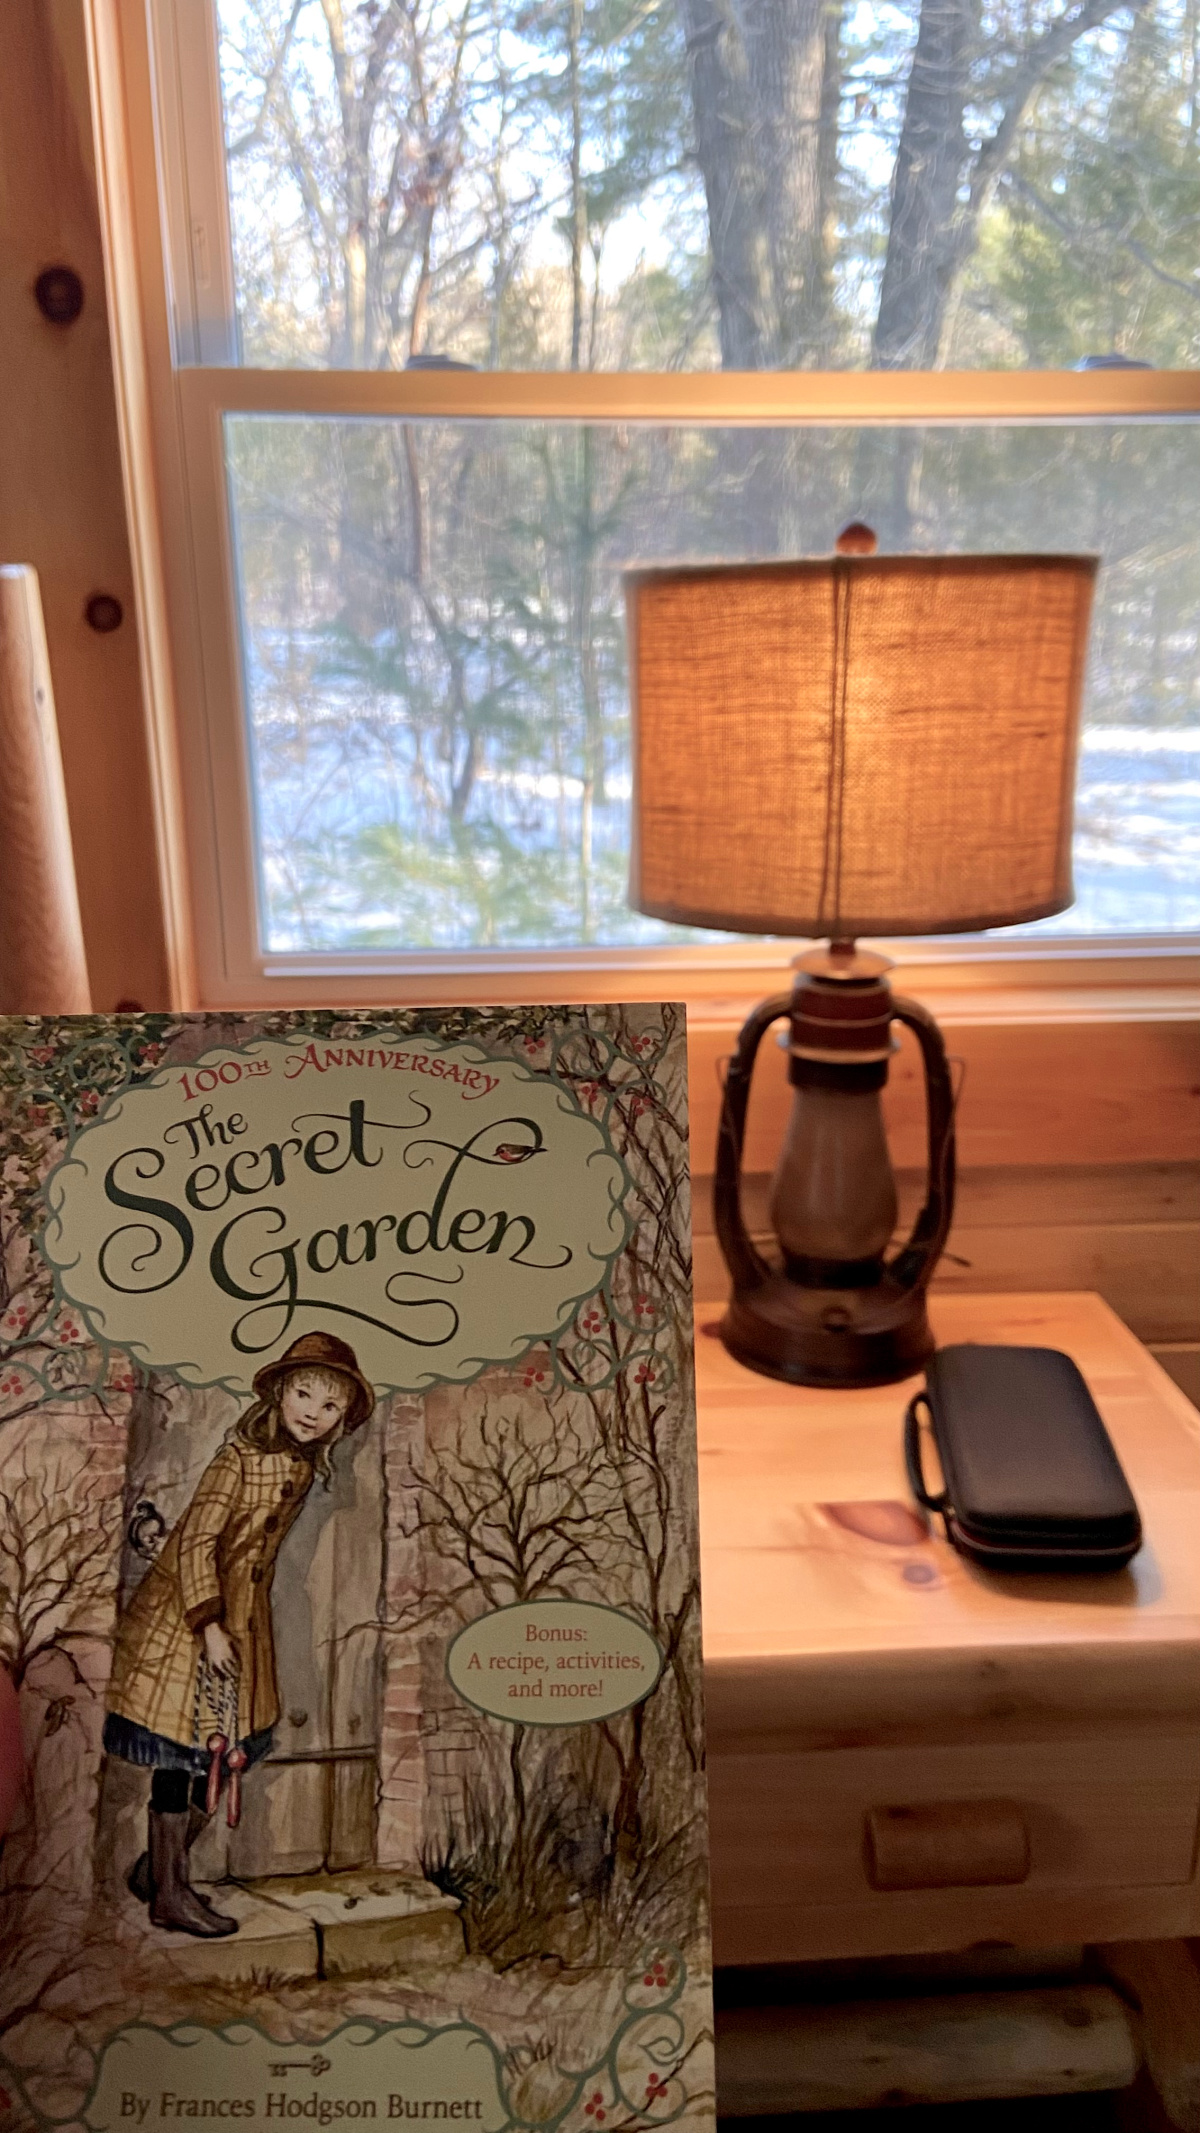 Reading The Secret Garden at the cabin.